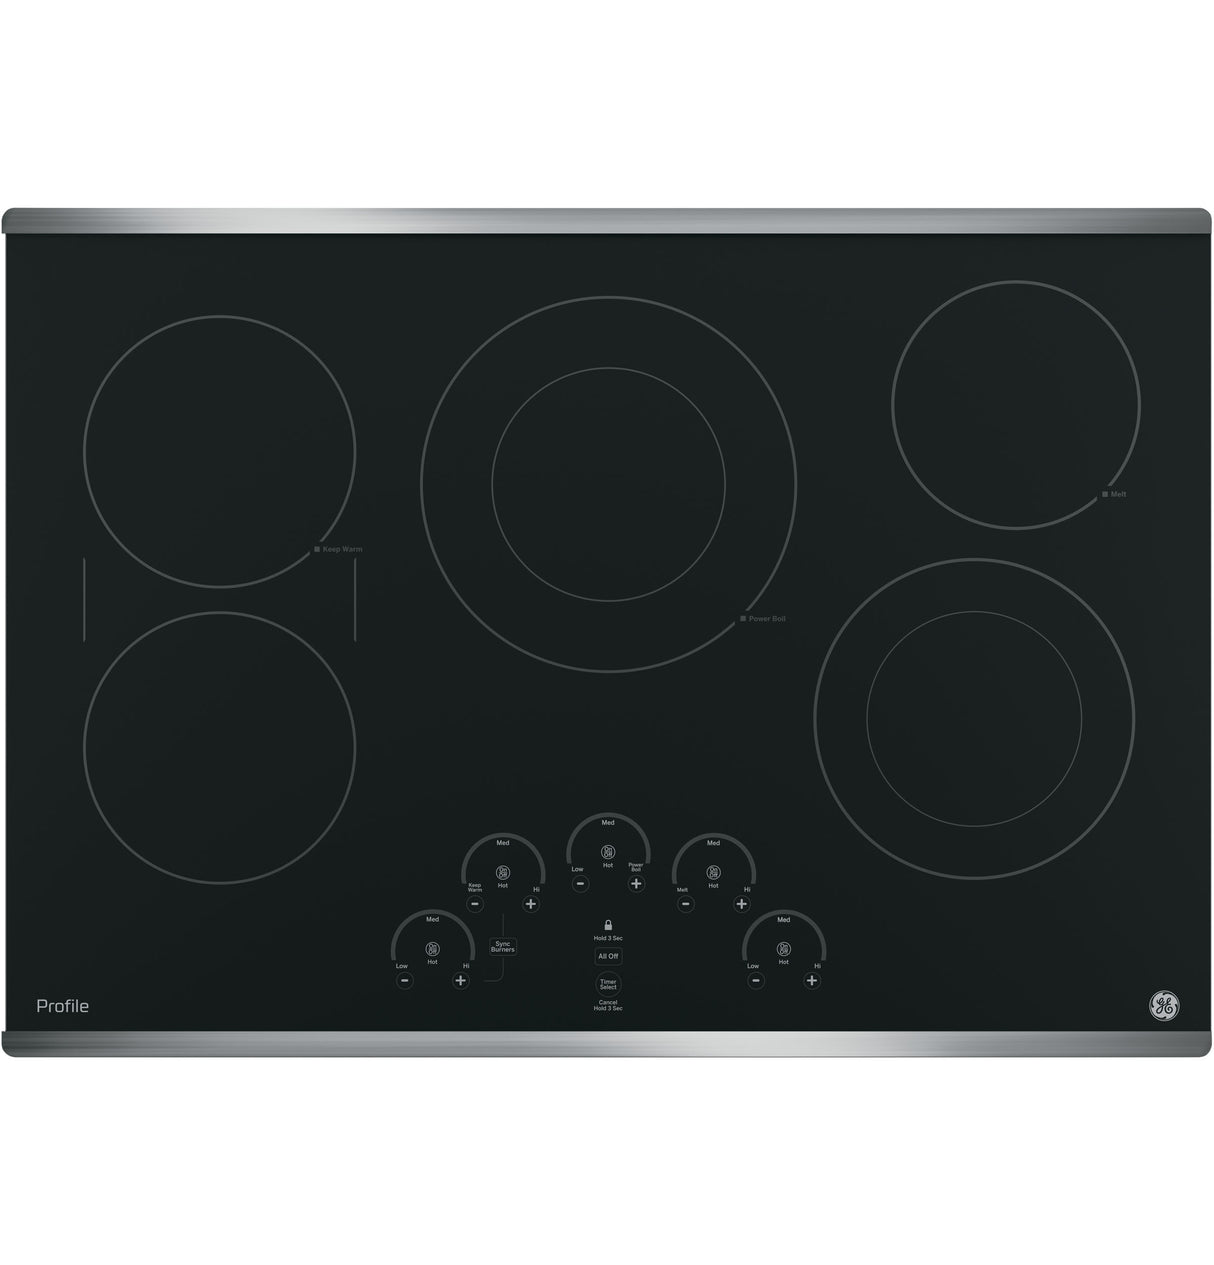 GE Profile(TM) 30" Built-In Touch Control Electric Cooktop - (PP9030SJSS)